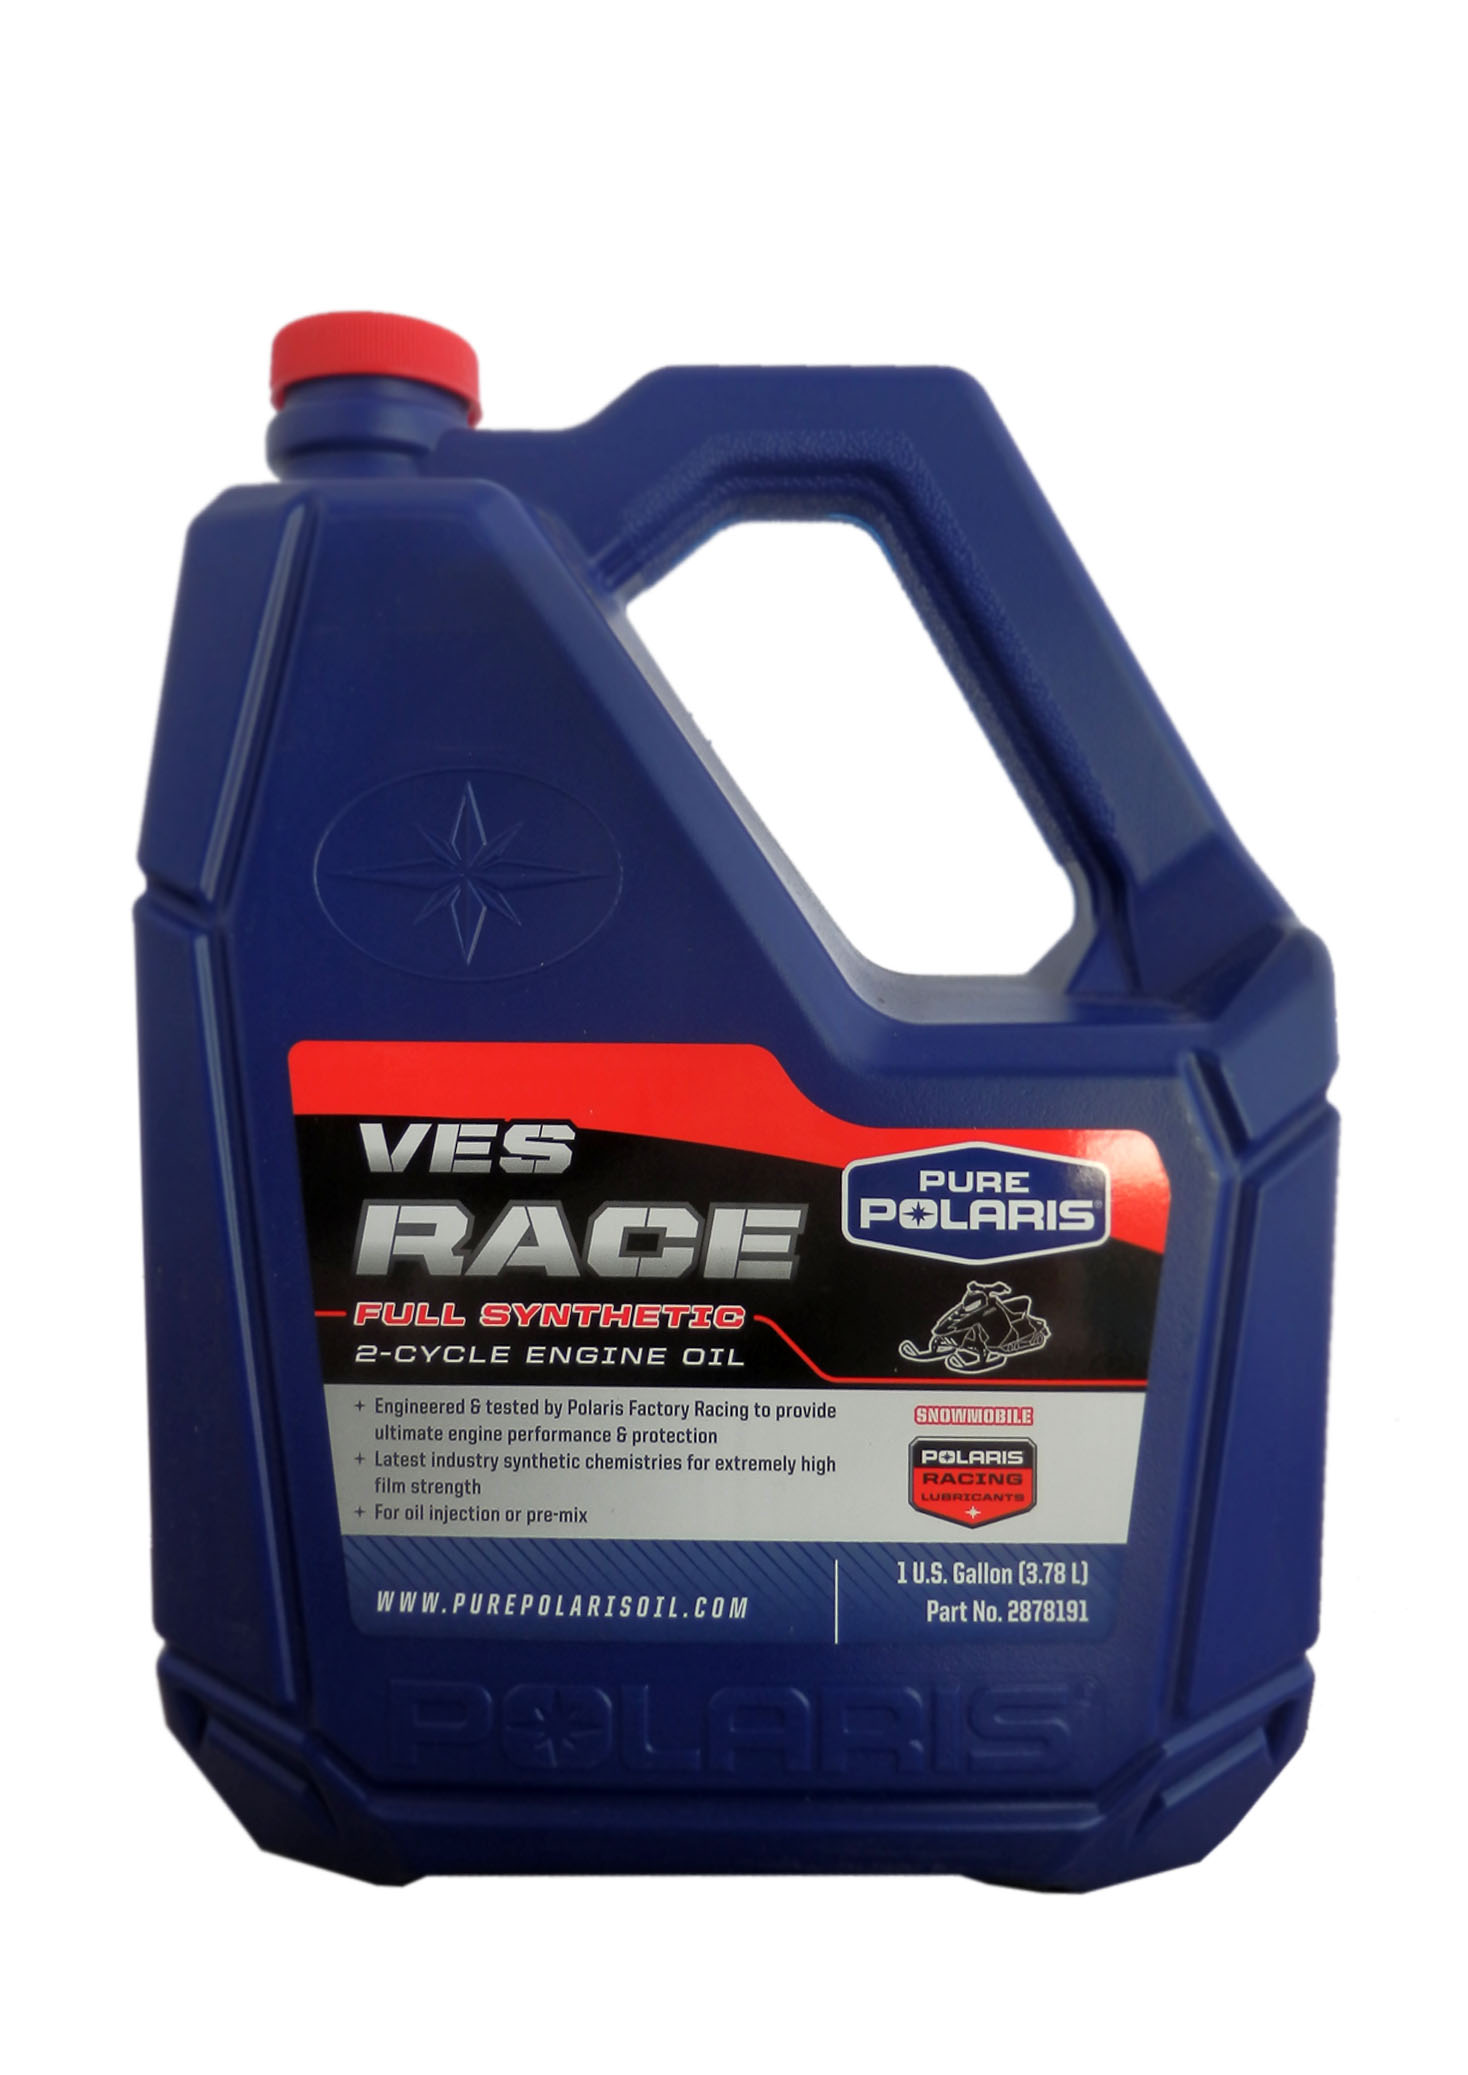 Моторное масло Polaris 2878191 VES Race Full Synthetic 2-cycle Oil  3.78 л